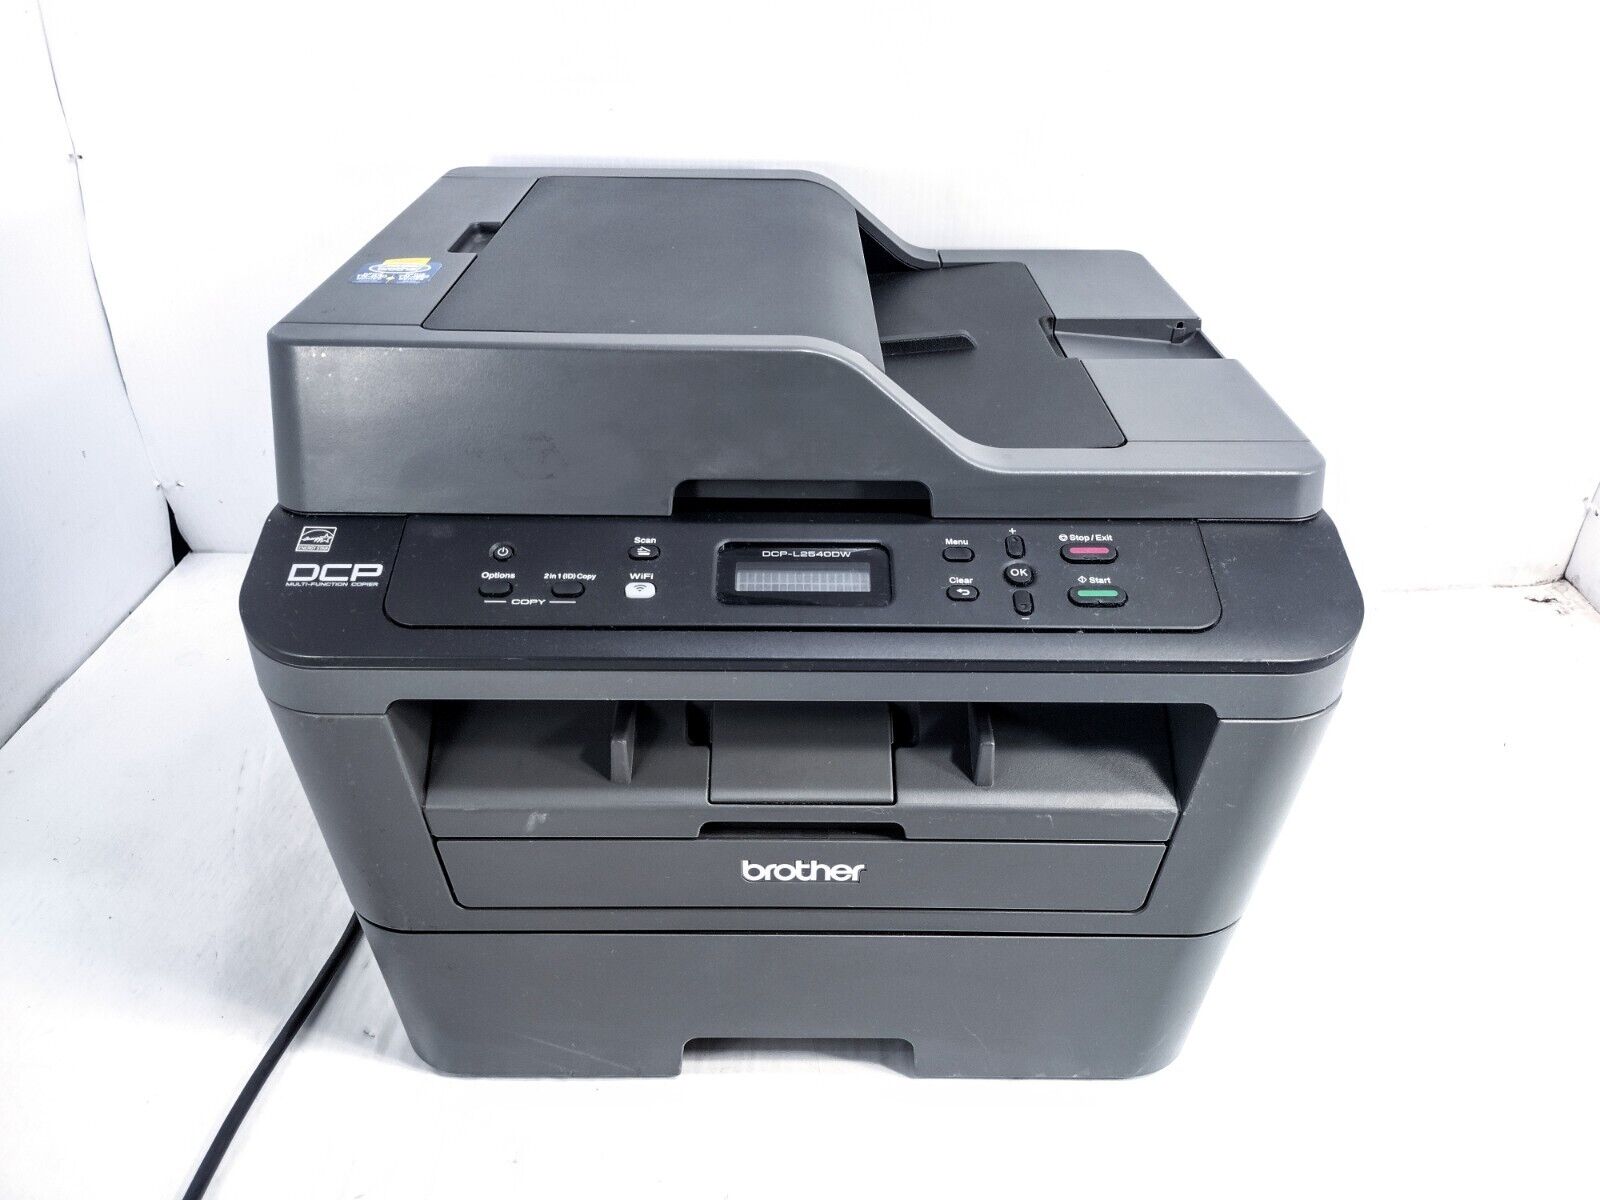 Brother DCP-L2540DW Laser Multifunction Printer - Monochrome 